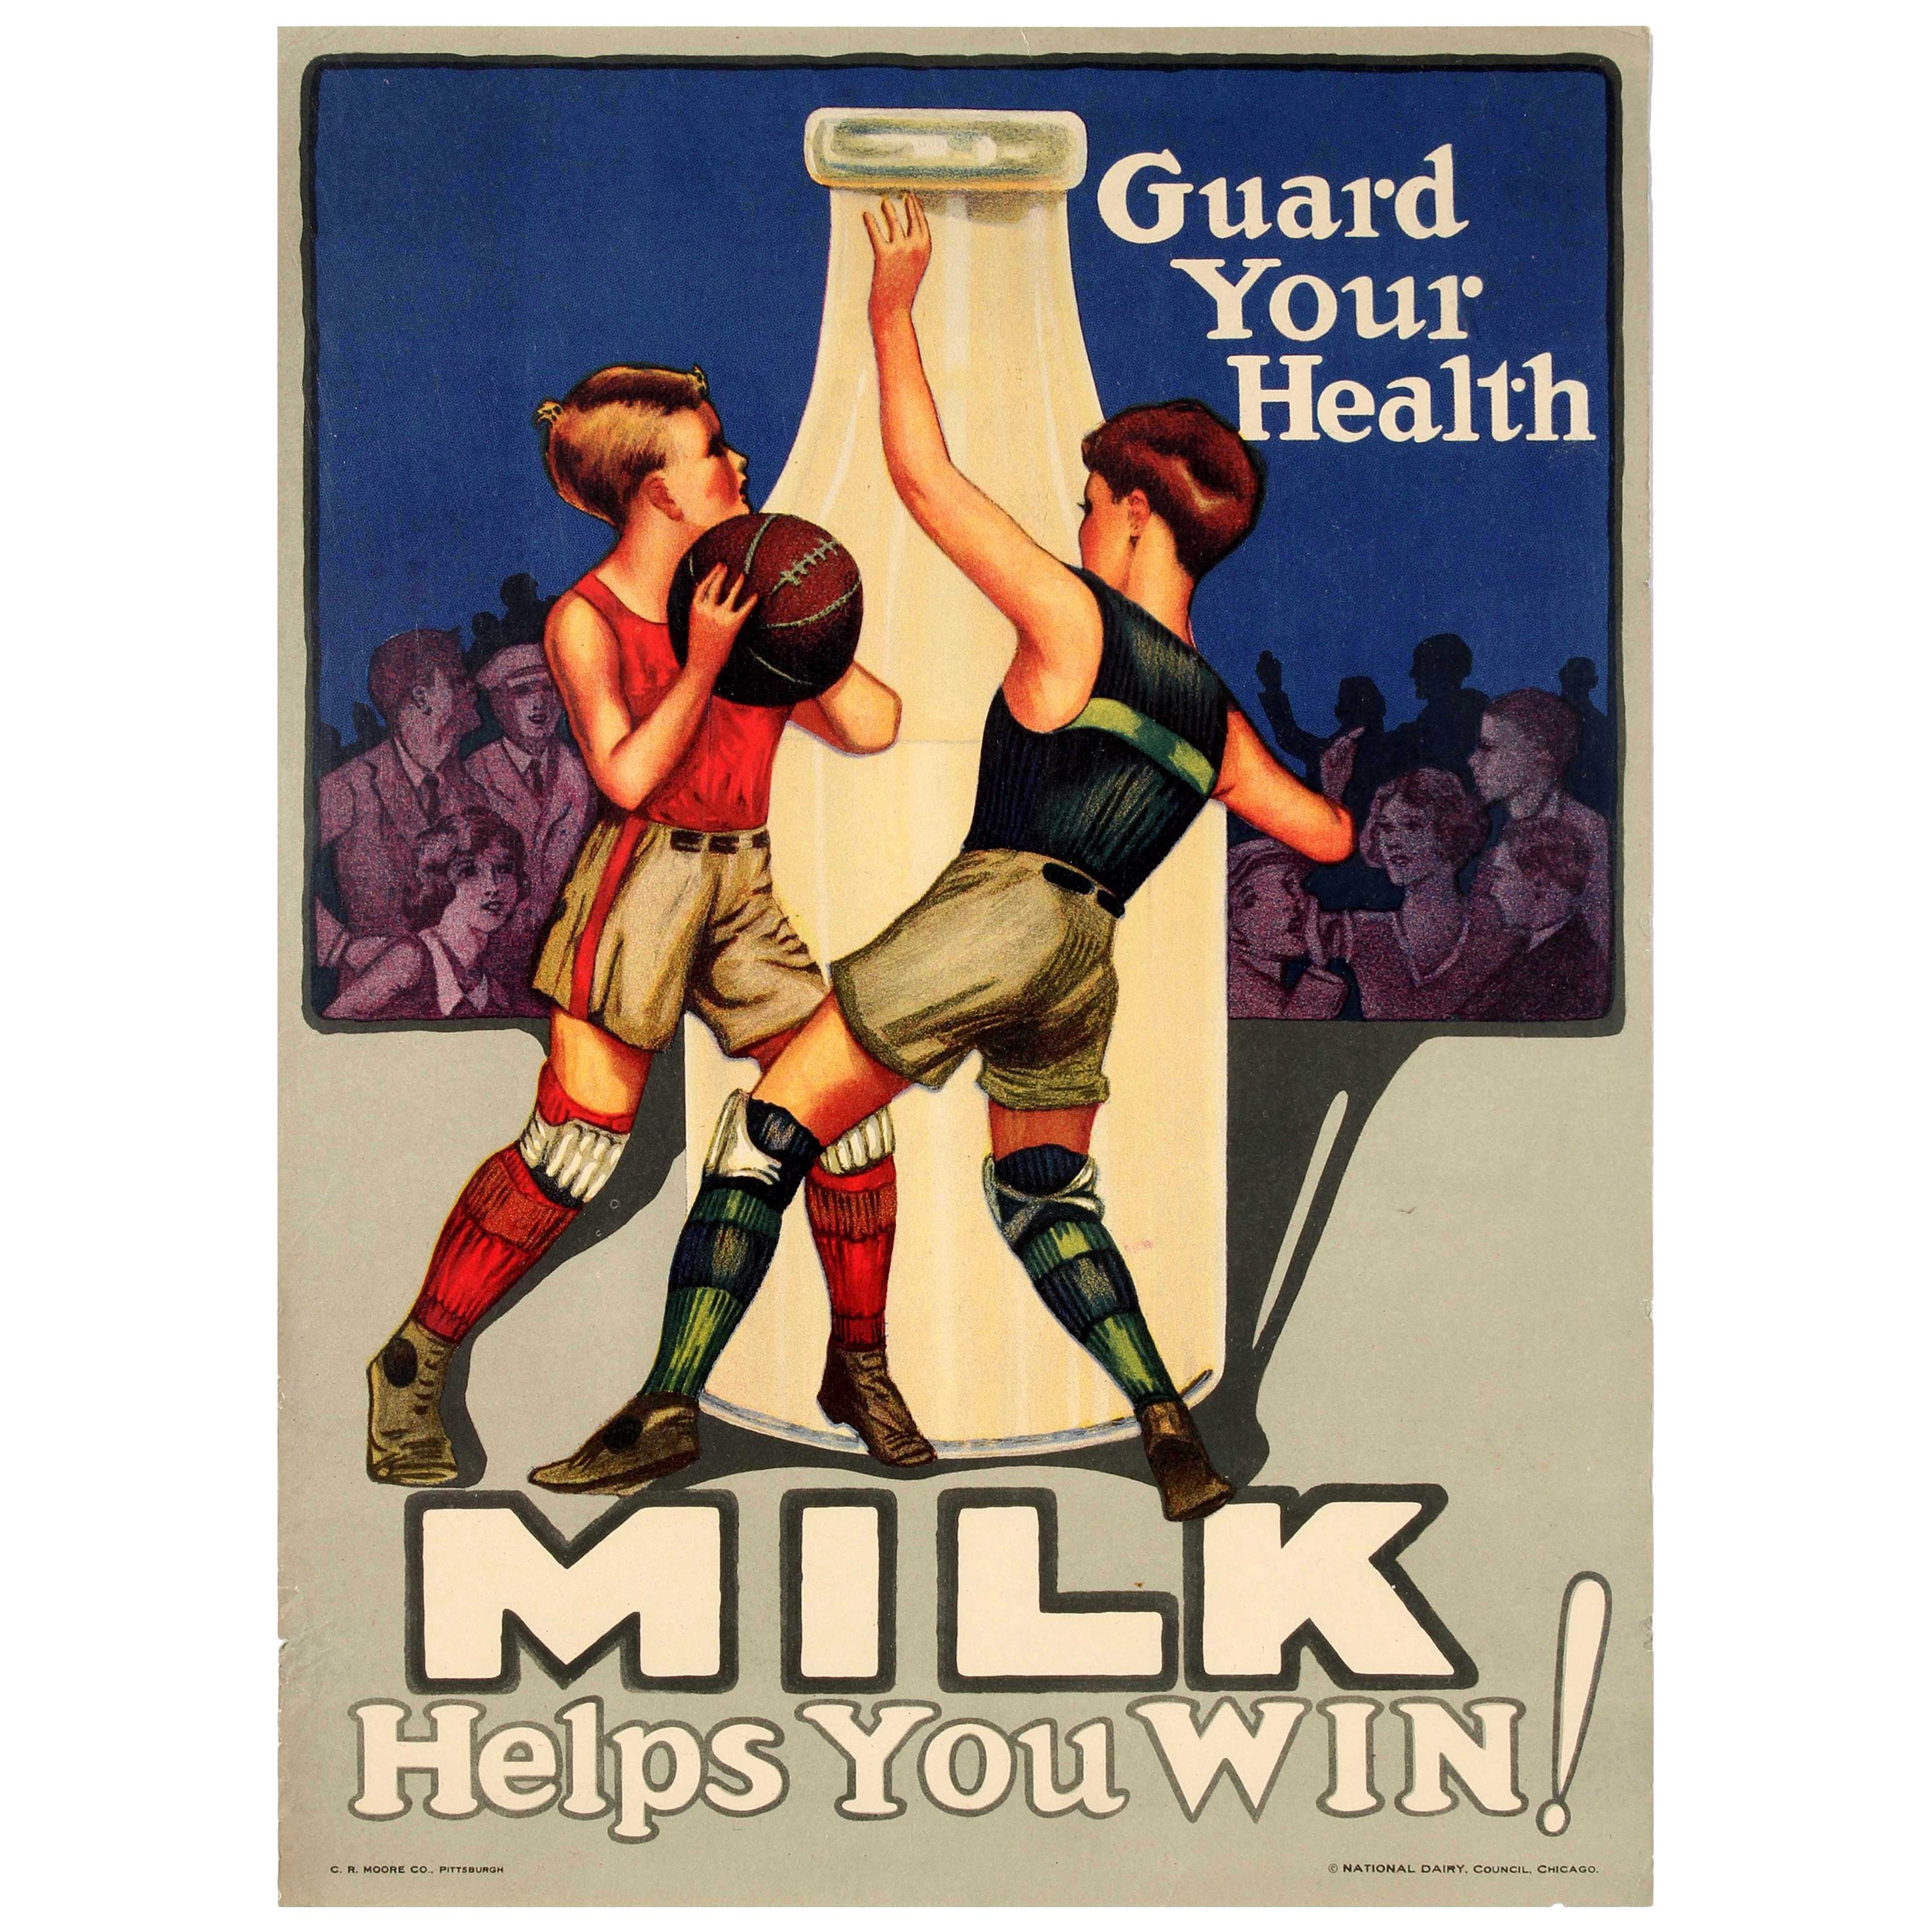 Original Vintage Poster Guard Your Health Milk Helps You Win Ft. Basketball Game